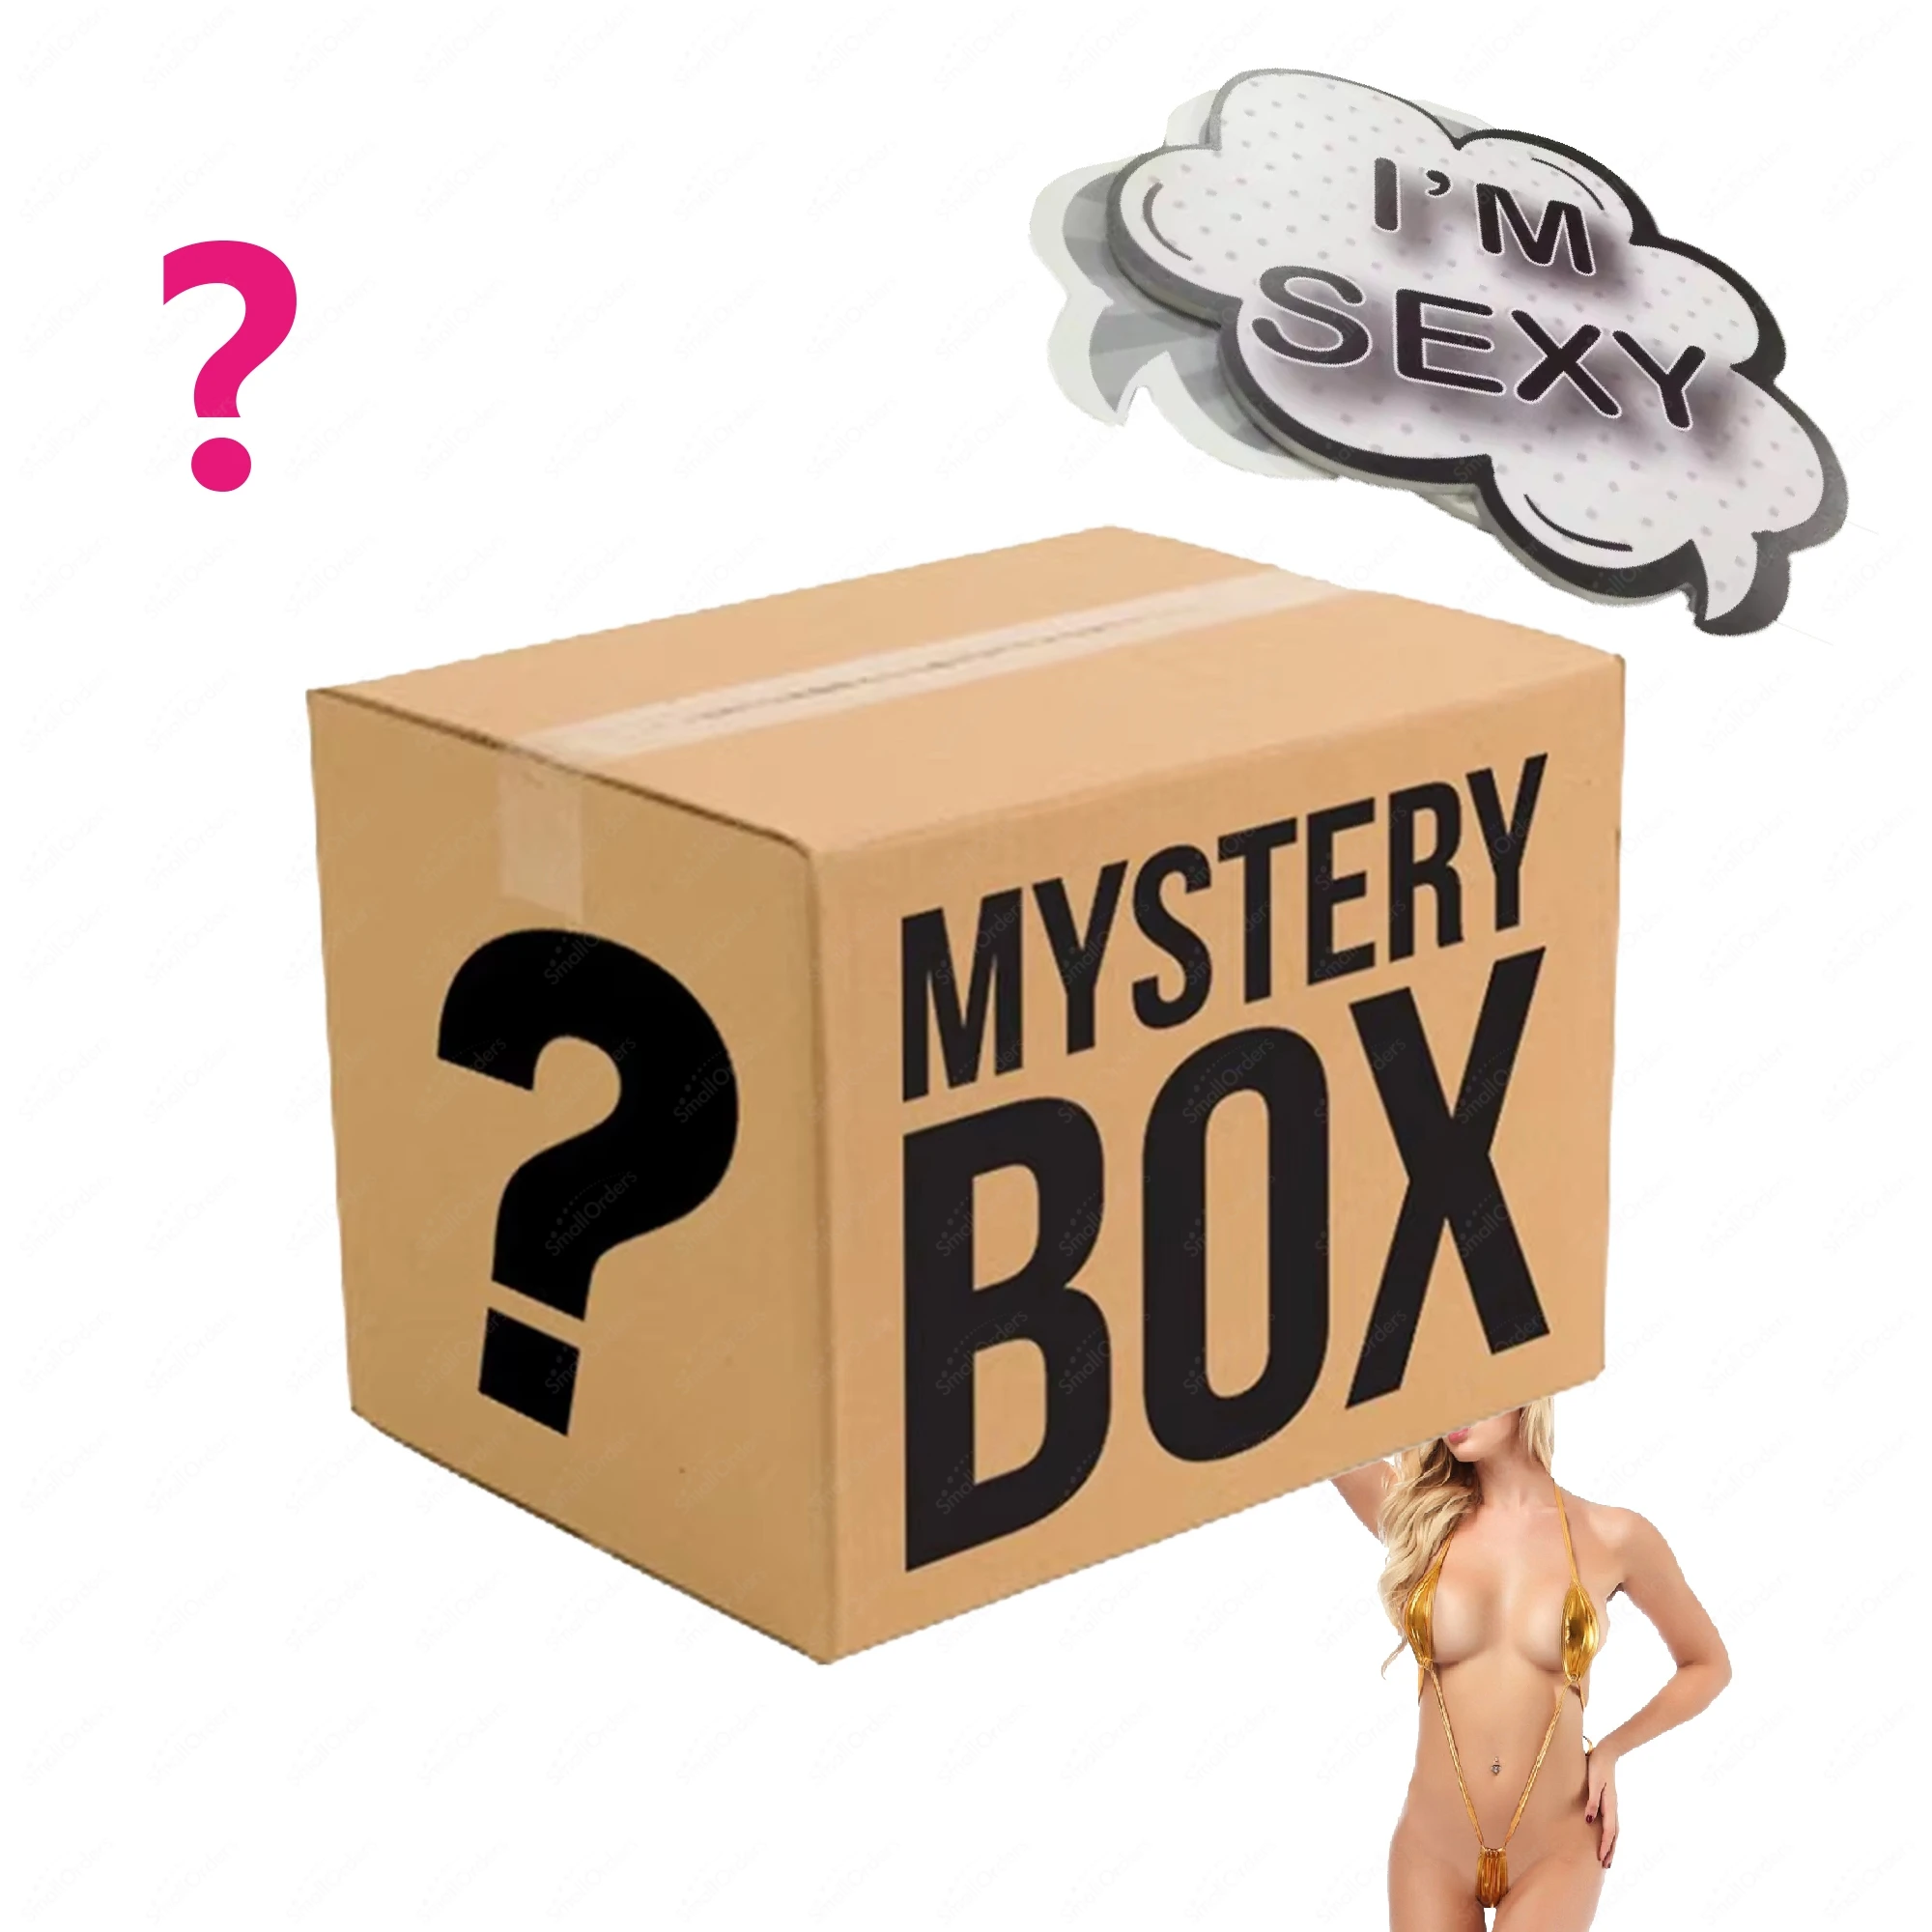 New product ideas 2024 adult sex toy game products random mistery surprise lucky mystery box luxury party gift set for women men